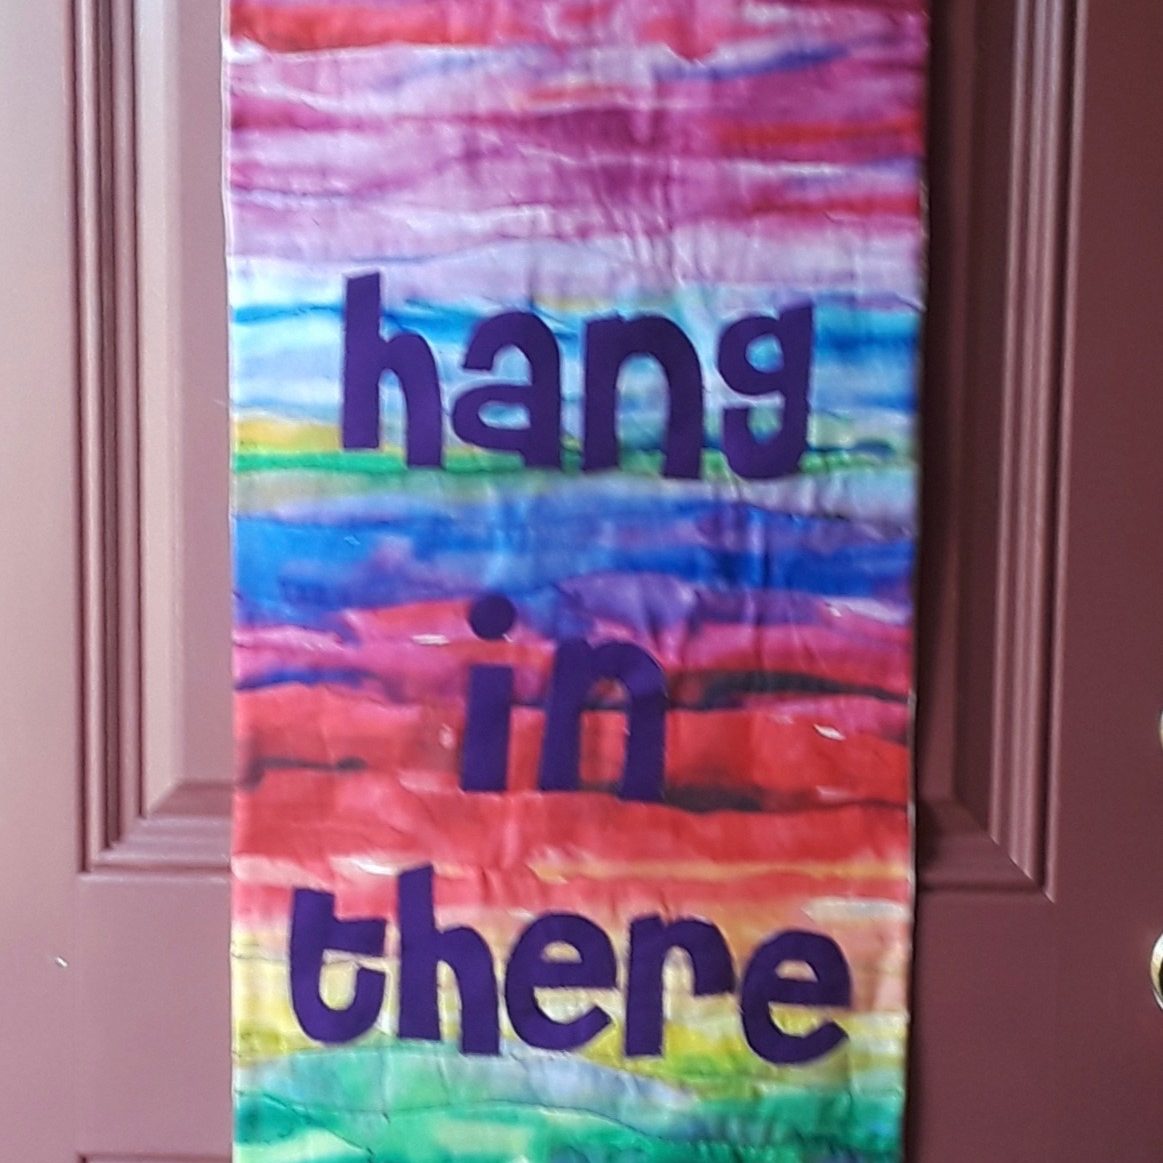 multi-colored quilted banner hanging on interior door, text: hang in there